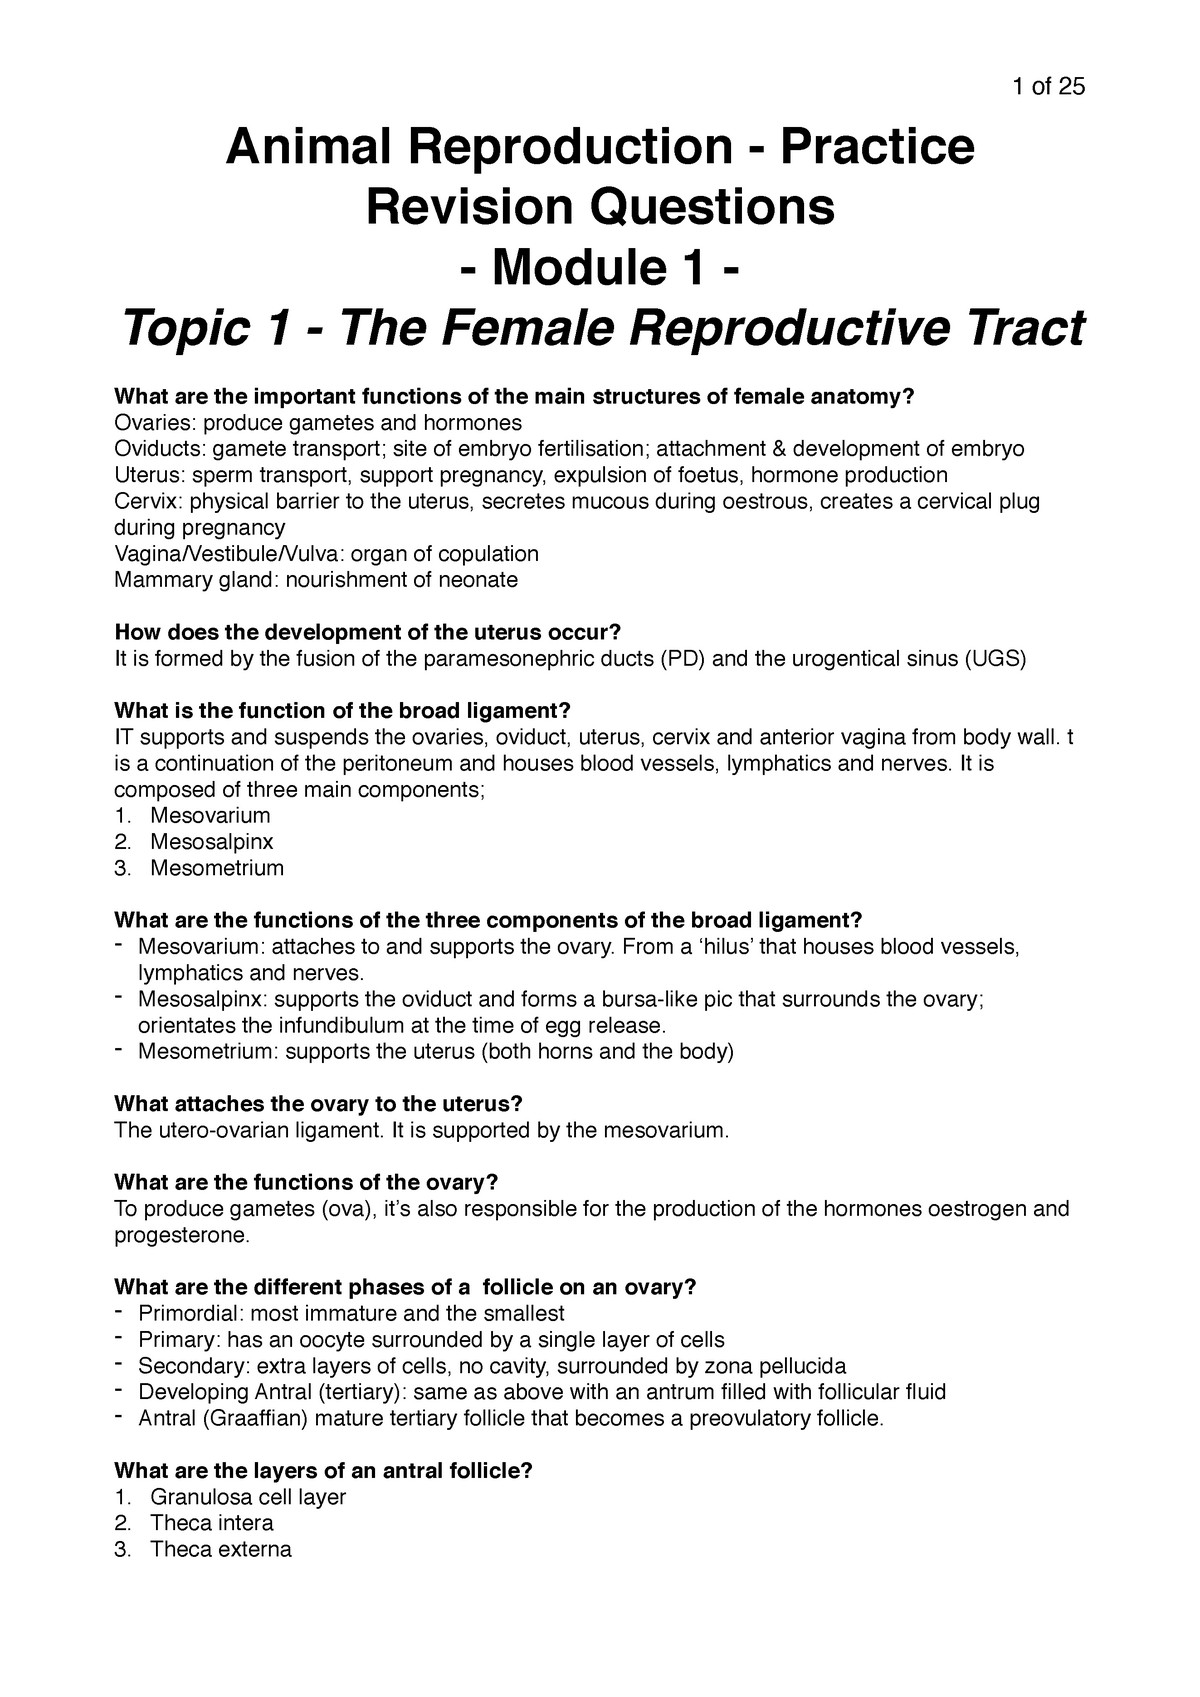 Practice Questions for Animal Reproduction - 1 of 25 Animal Reproduction  Practice Revision Questions - Studocu